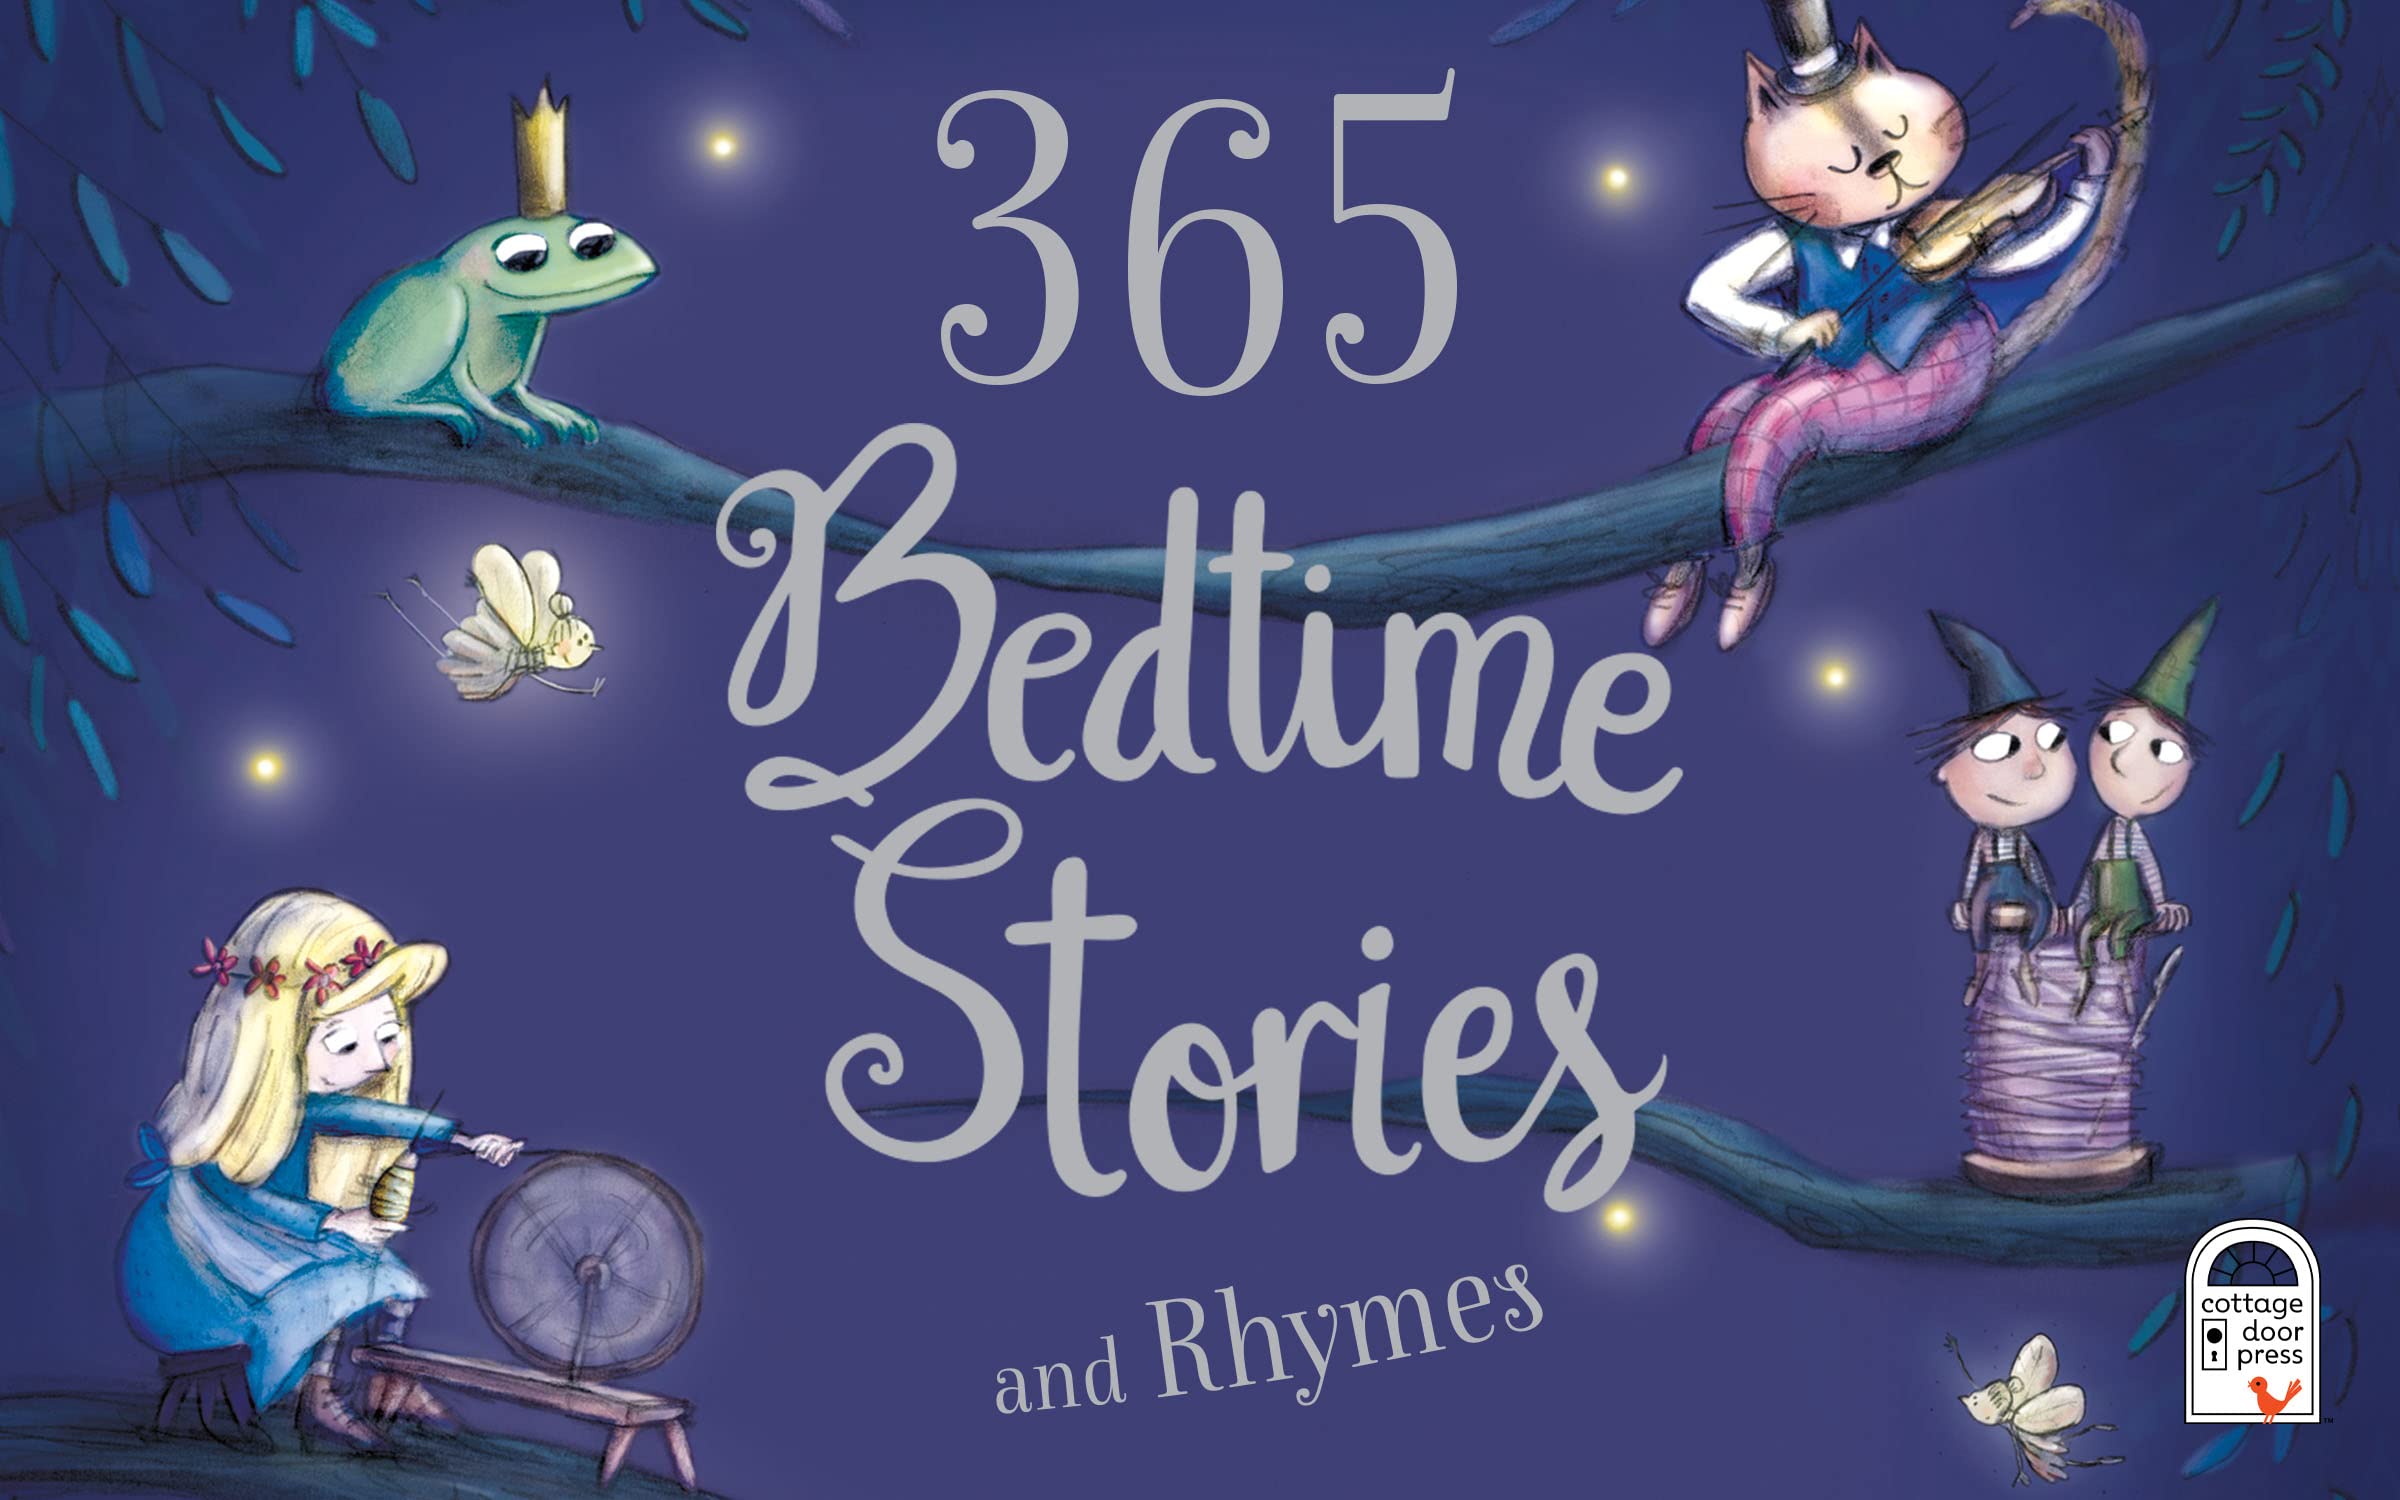 365 Bedtime Stories and Rhymes: Short Bedtime Stories, Nursery Rhymes and Fairy Tales Collections for Children